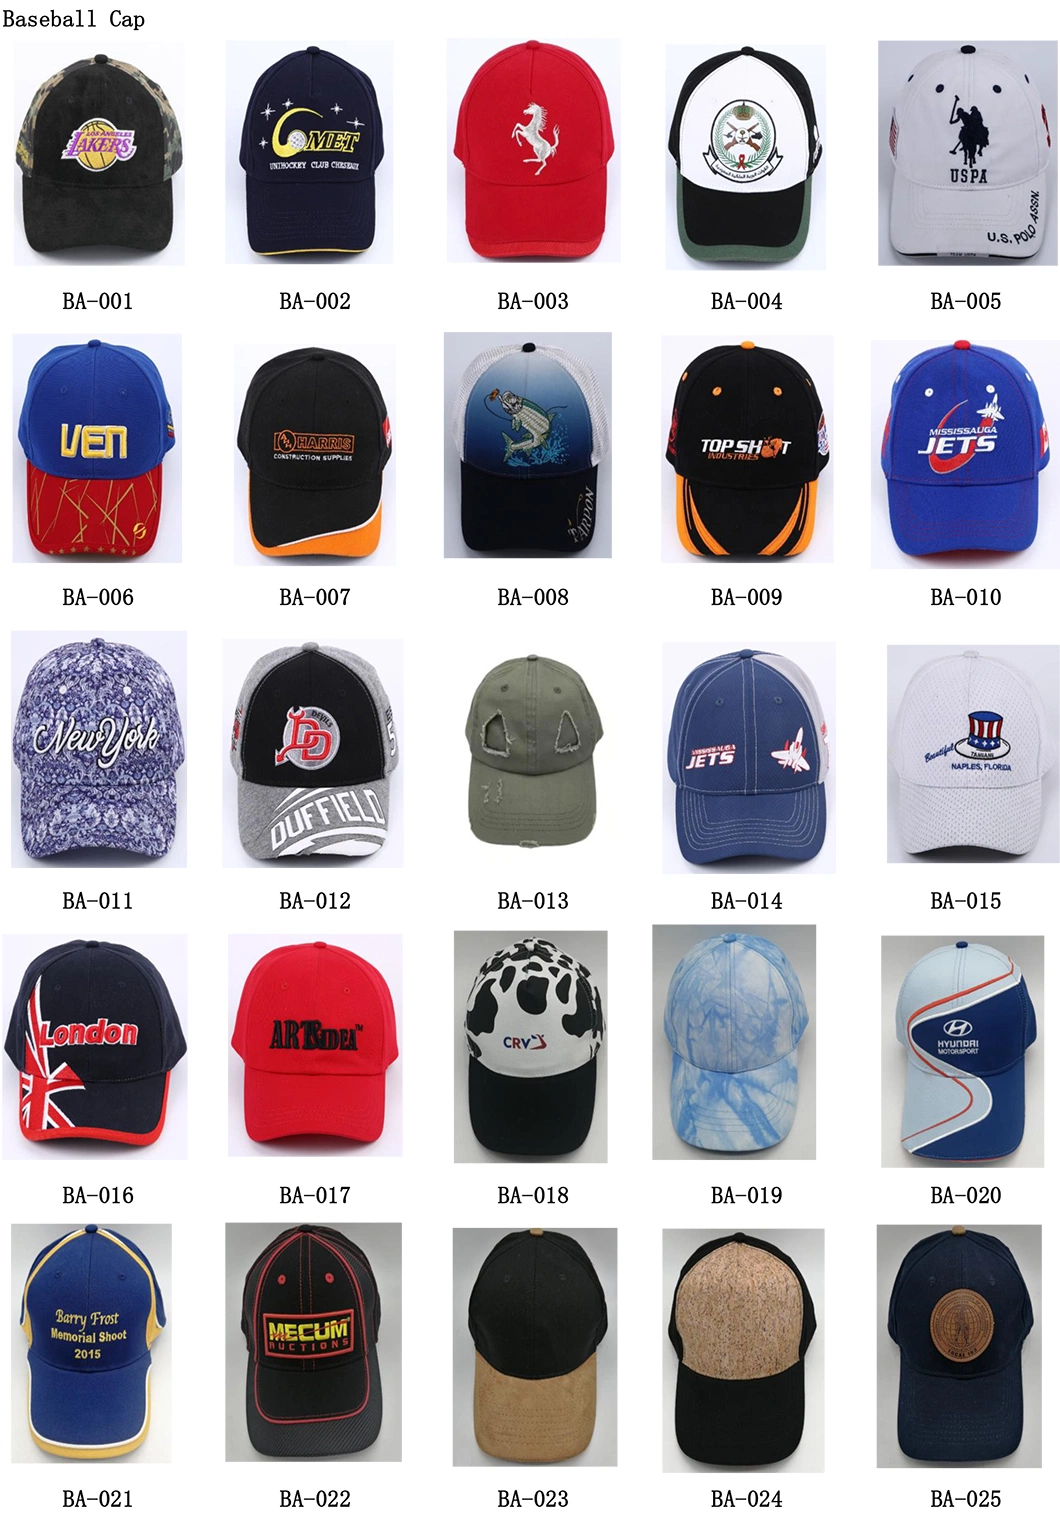 Factory Customized Hot Selling Plain Suede Baseball Caps Outdoor Sport Caps and Hats 6 Panel